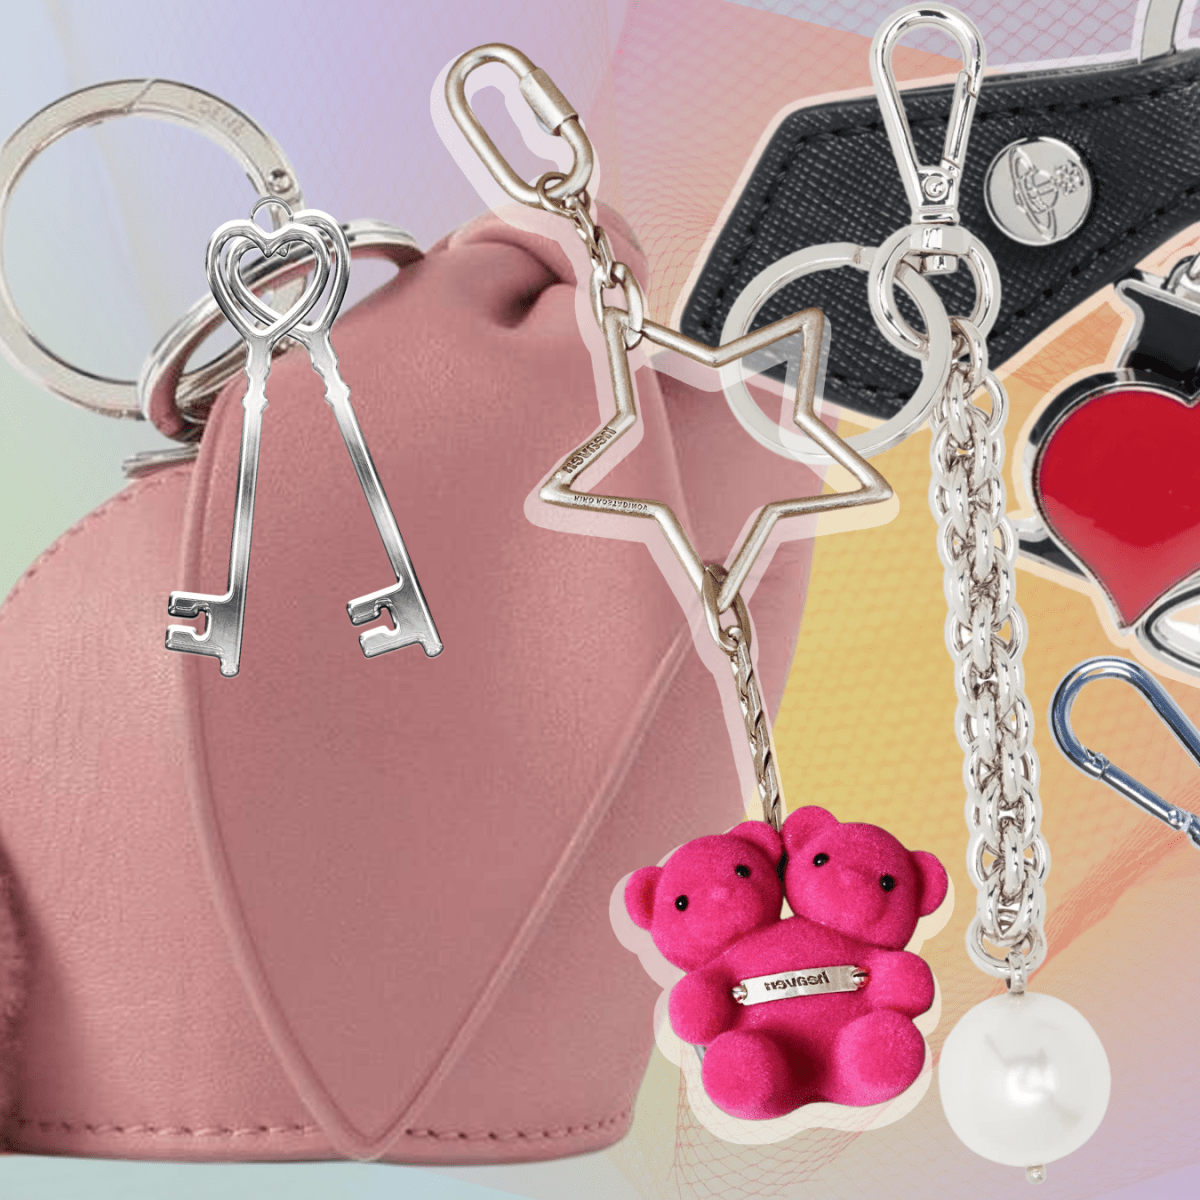 IT'S TIME TO GET YOURSELF A CHIC KEYCHAIN